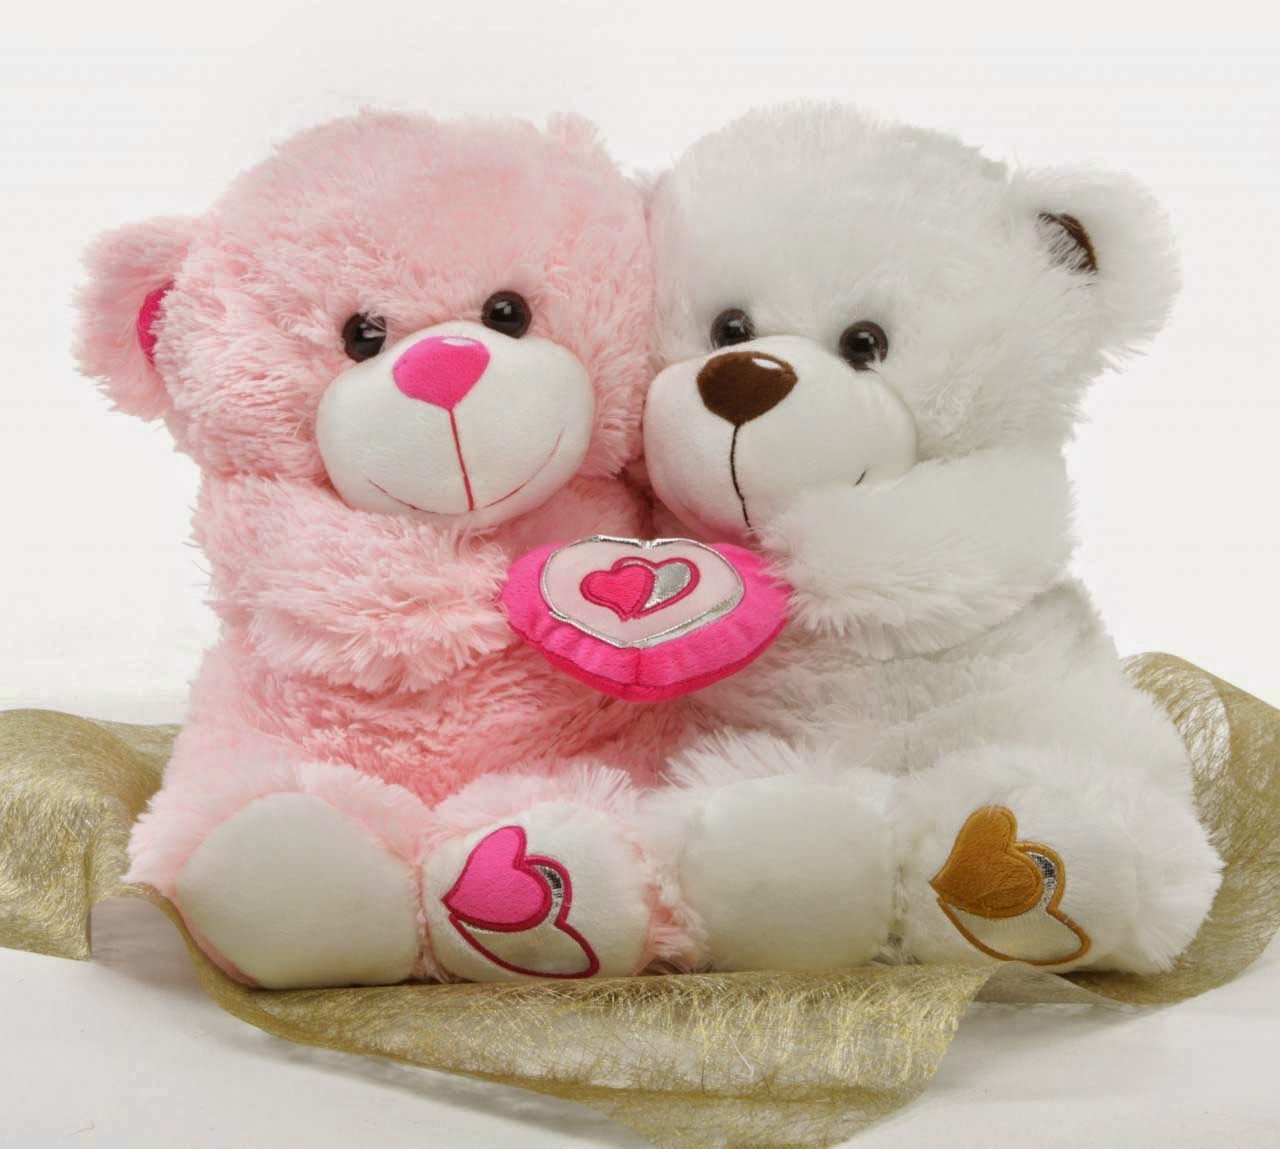 Free download Lovely And Beautiful Teddy Bear Wallpapers ...